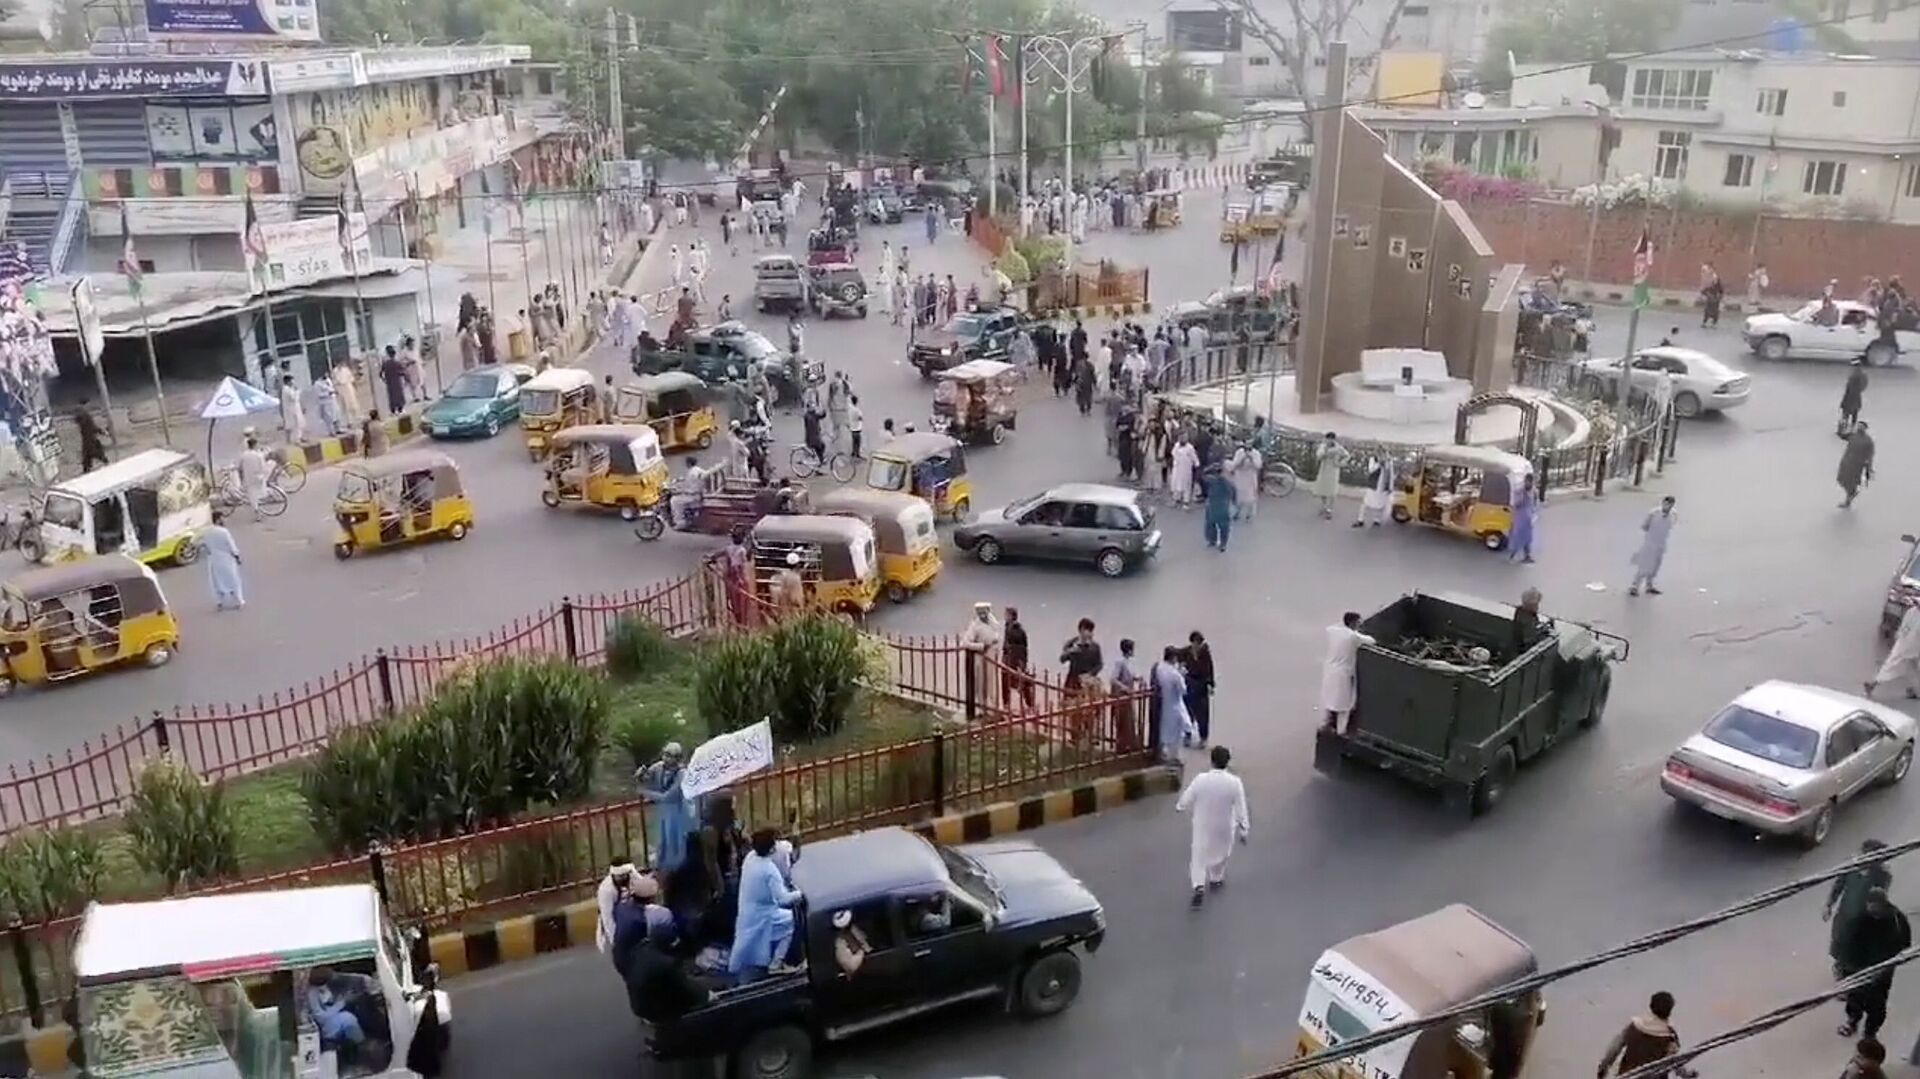 Taliban militants waving a Taliban flag on the back of a pickup truck drive past a crowded street at Pashtunistan Square area in Jalalabad, Afghanistan in this still image taken from social media video uploaded on August 15, 2021. Social media website/via REUTERS THIS IMAGE HAS BEEN SUPPLIED BY A THIRD PARTY. - Sputnik International, 1920, 07.09.2021